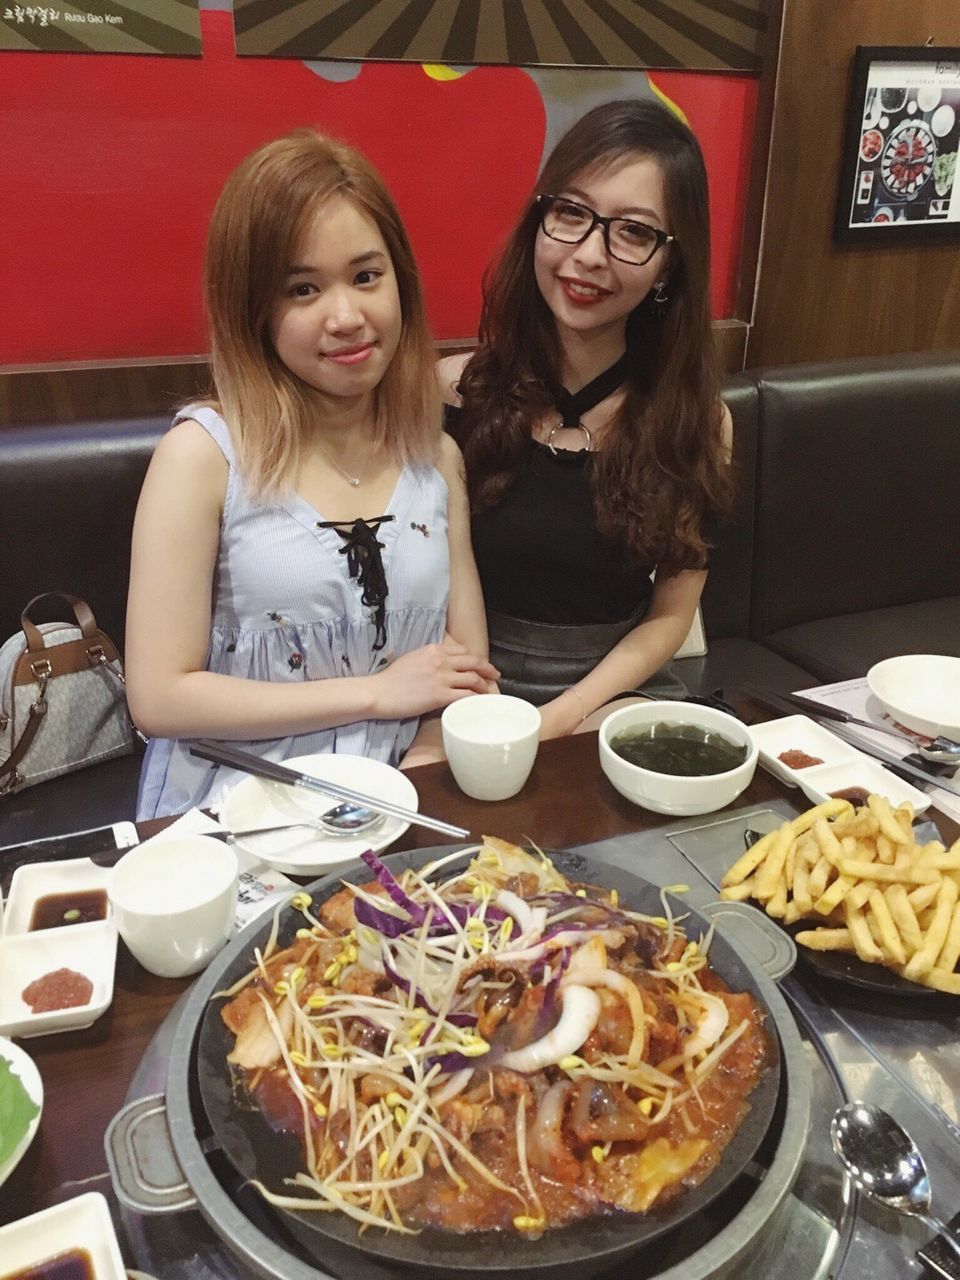 food and drink, food, real people, two people, leisure activity, ready-to-eat, table, lifestyles, sitting, bowl, togetherness, indoors, serving size, freshness, plate, young adult, young women, happiness, eyeglasses, smiling, day, friendship